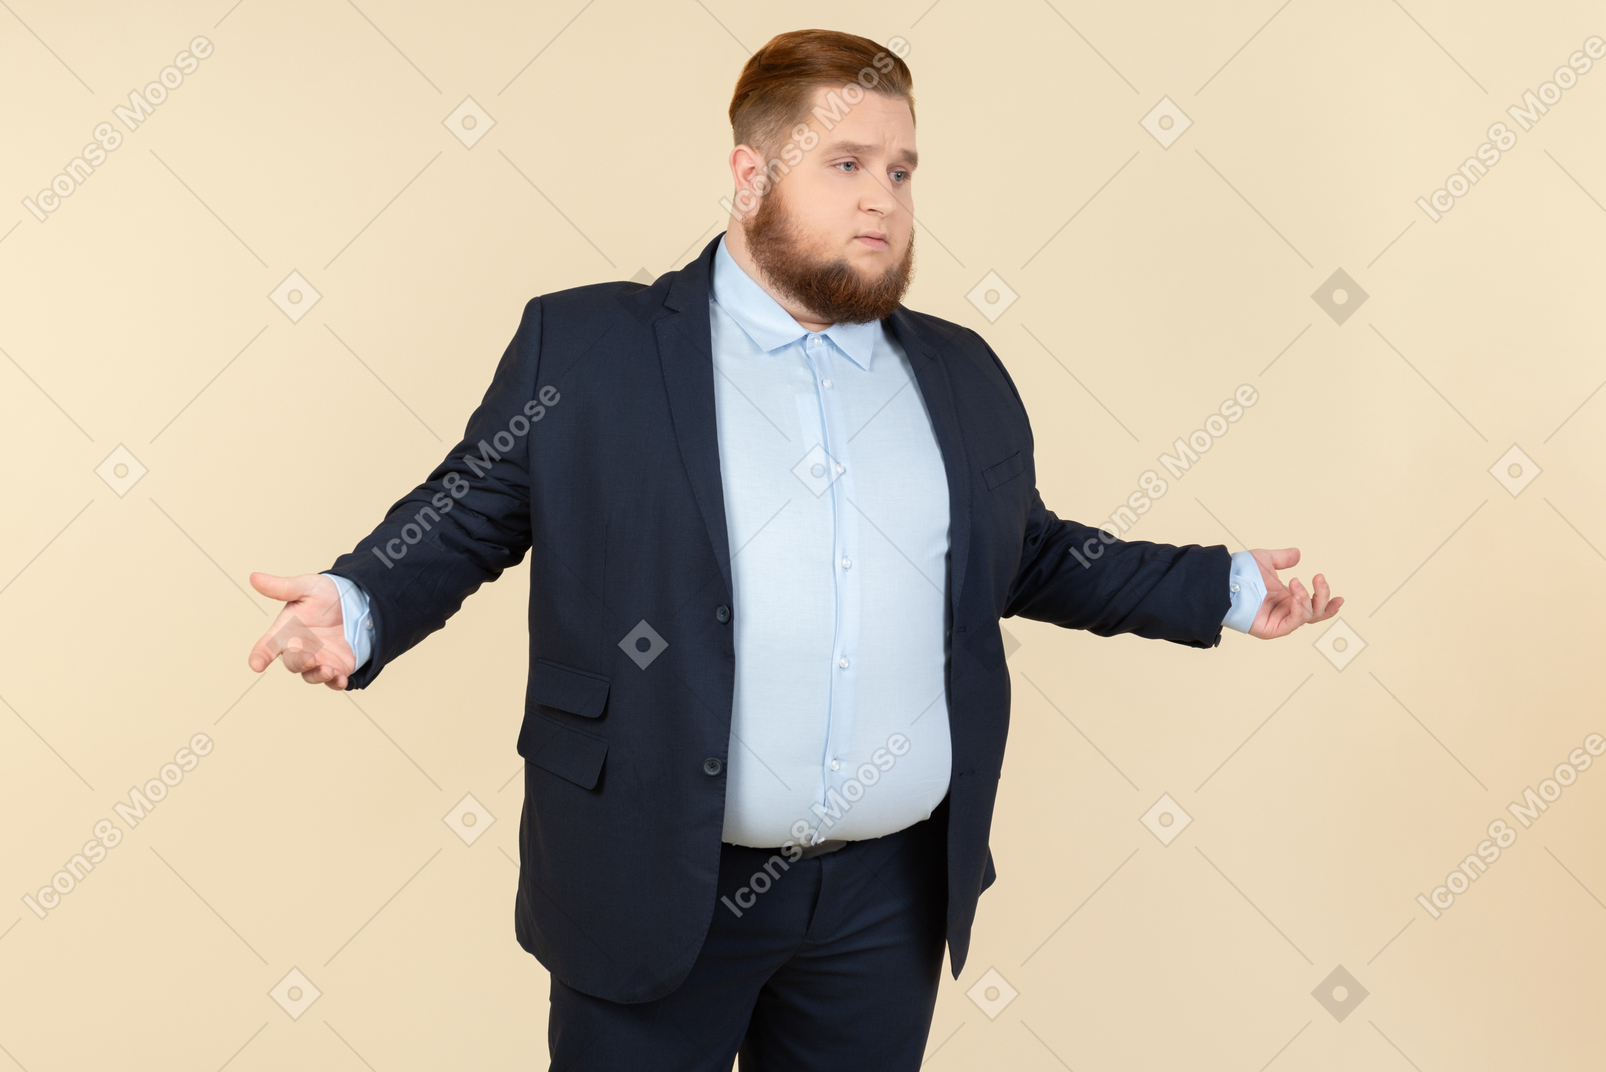 Young overweight office employee trying to understand something